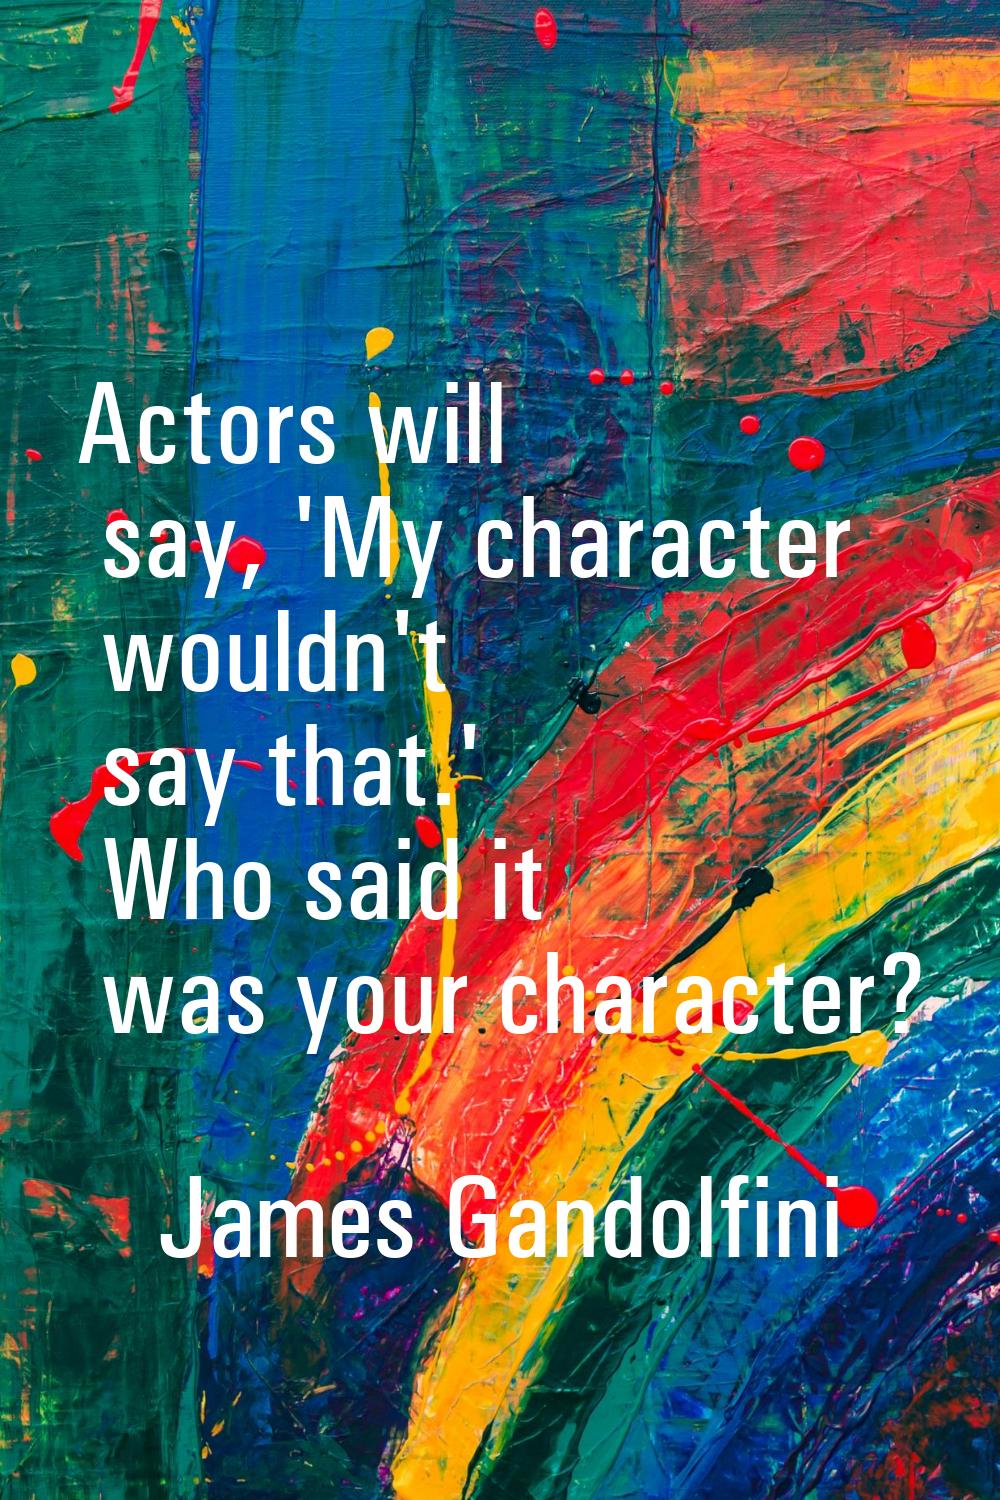 Actors will say, 'My character wouldn't say that.' Who said it was your character?